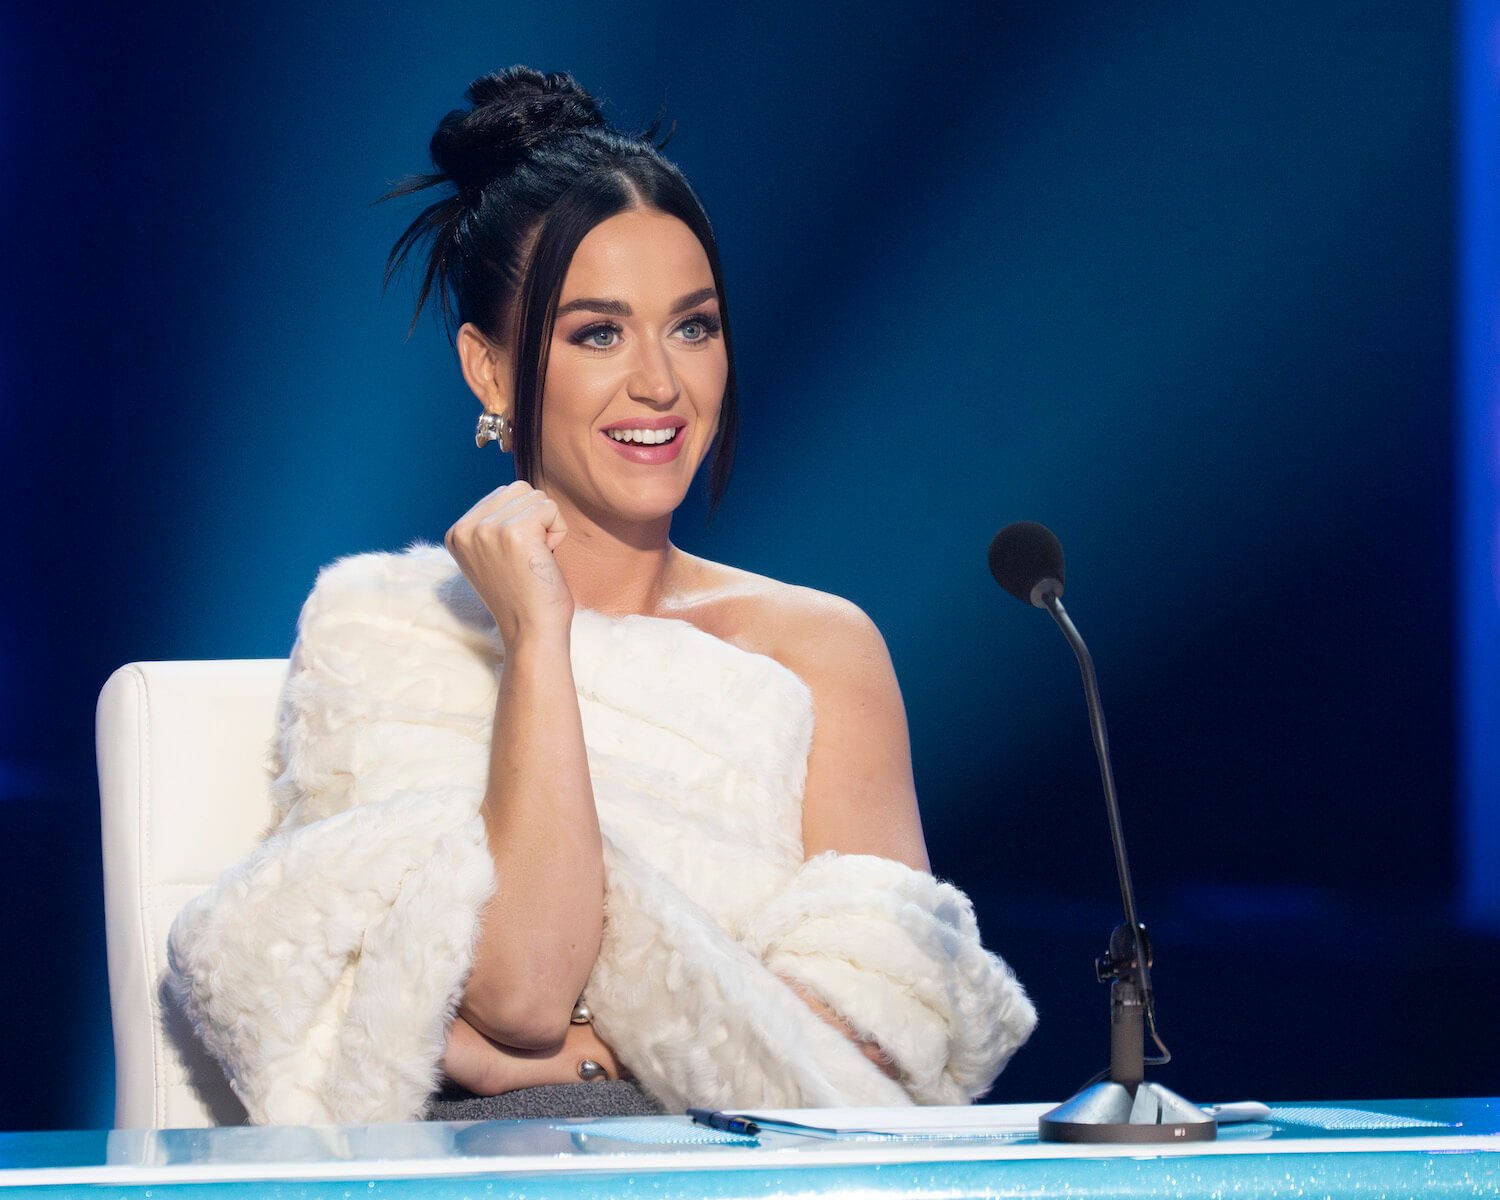 'American Idol' Season 22 judge Katy Perry wearing a white furry outfit while sitting at the judges table